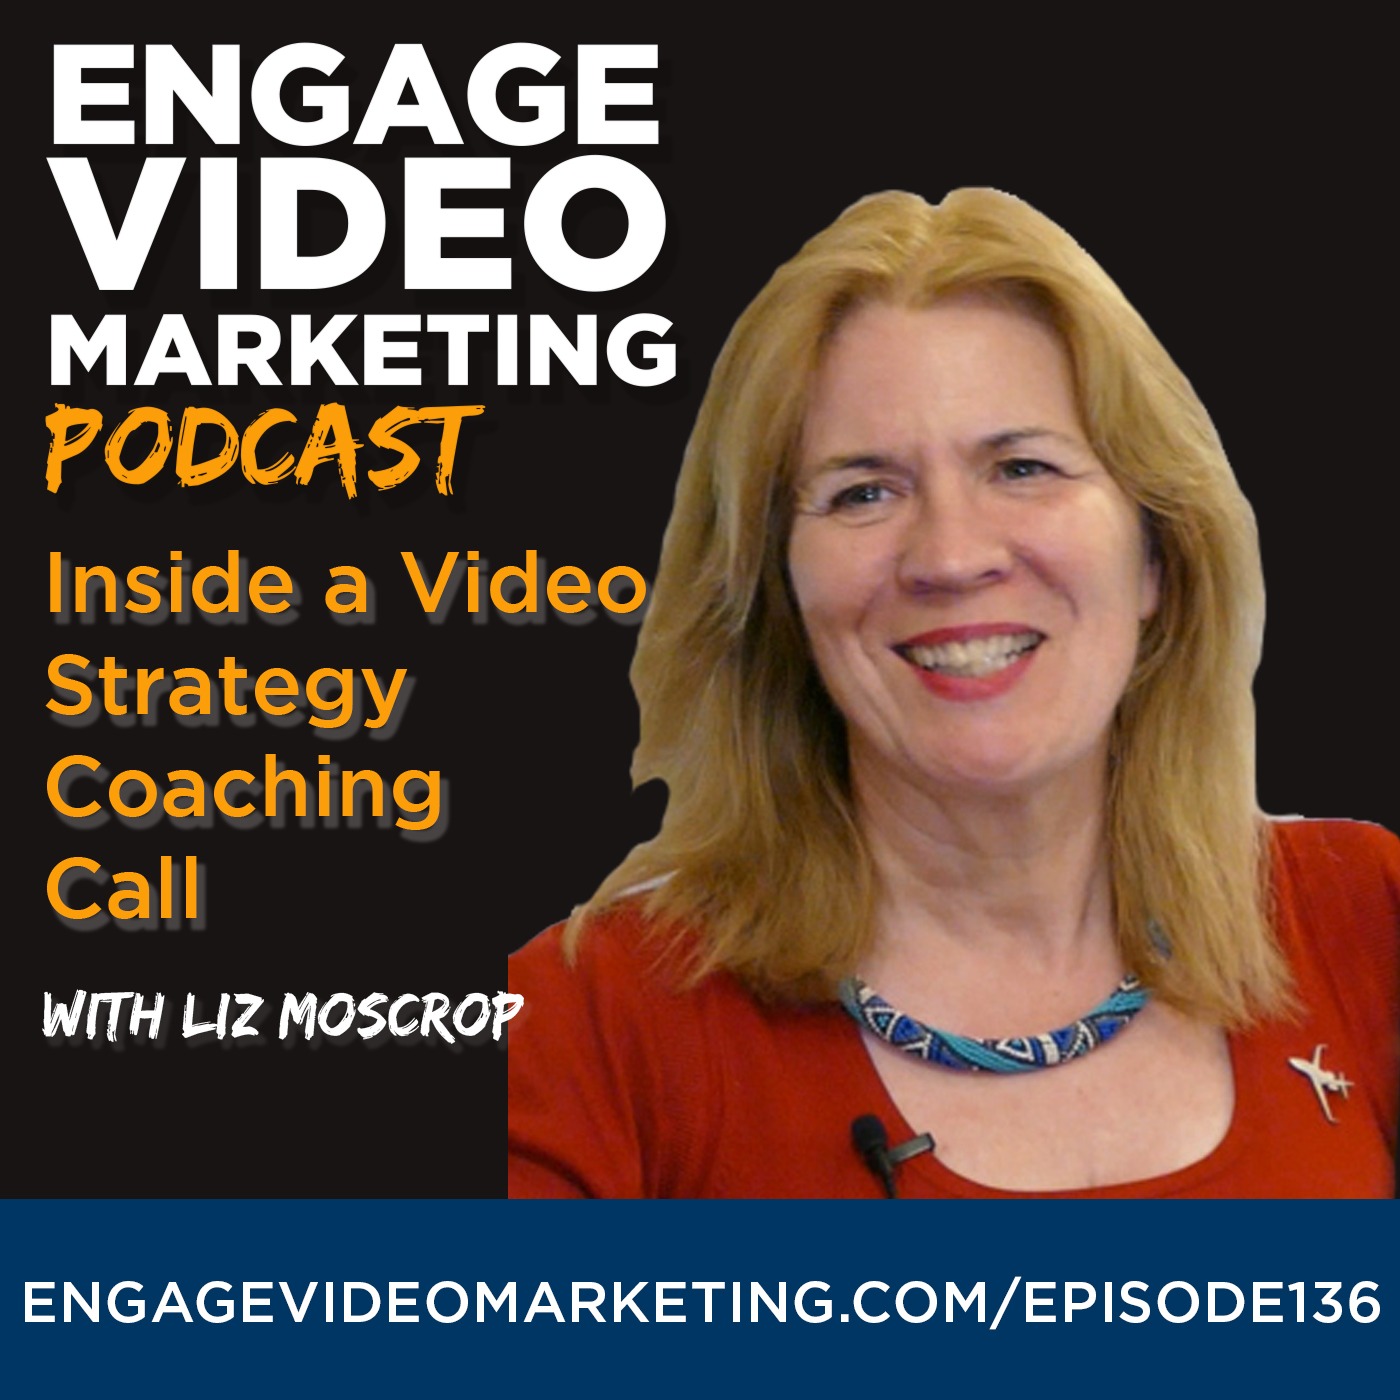 Inside a Video Strategy Coaching Call with Liz Moscrop